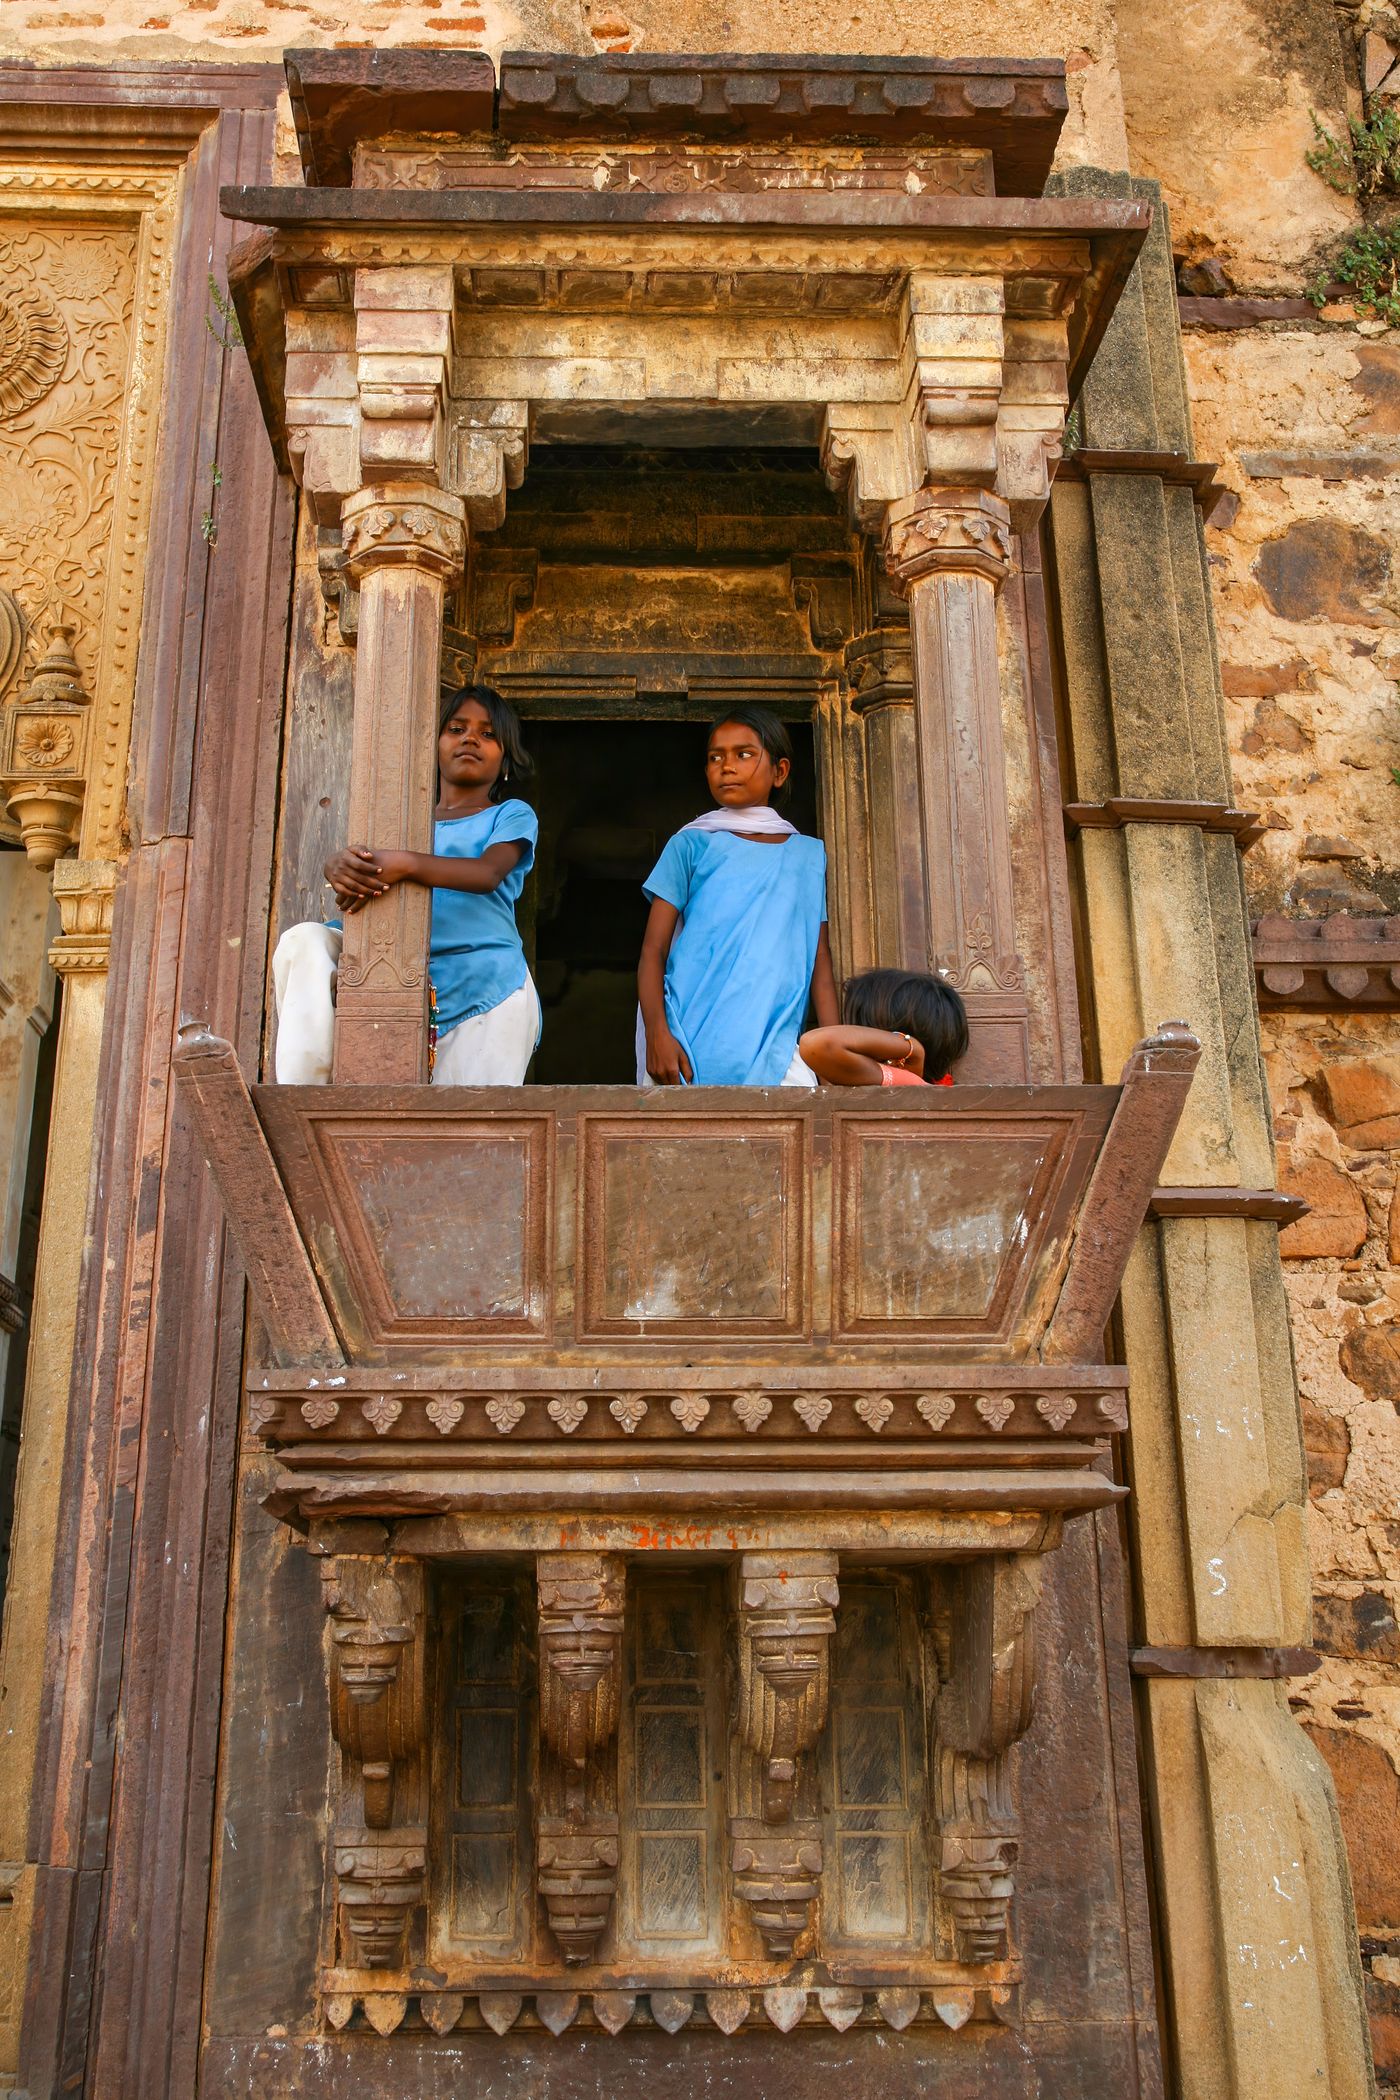 Local children peeping through a beautiful window of a historical Hindu temple in Orchha, India called Chaturbhuj 